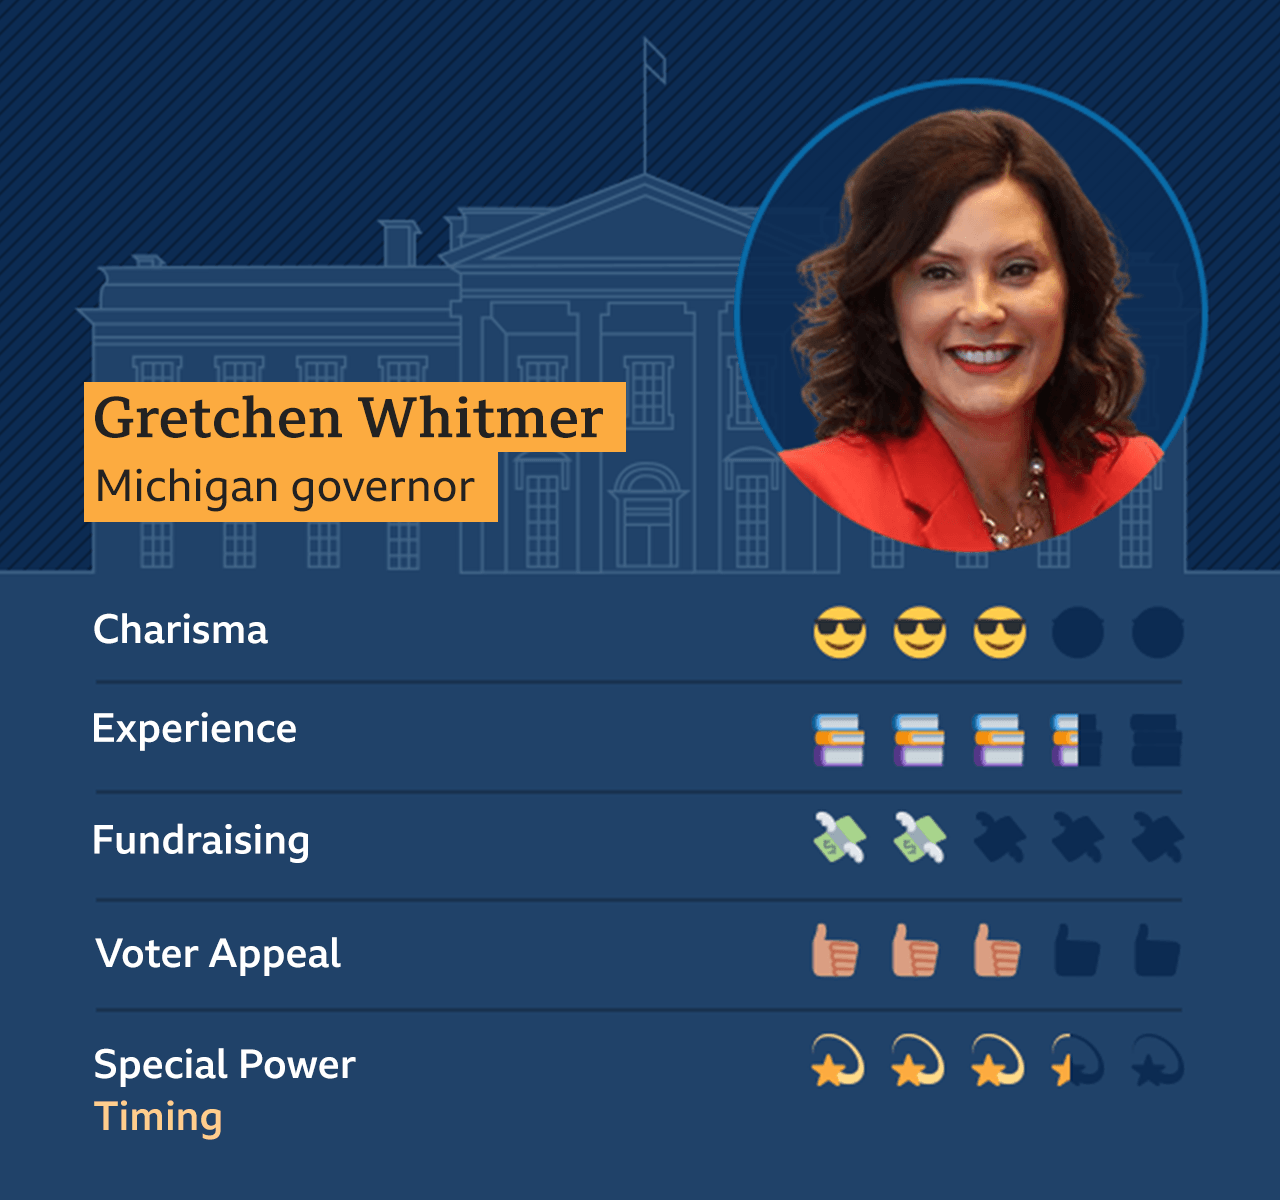 Graphic showing Gretchen Whitmer, Michigan Governor: Charisma - 3, Experience - 3.5, Fundraising - 2, Voter appeal - 3, Special Power - Timing - 3.5